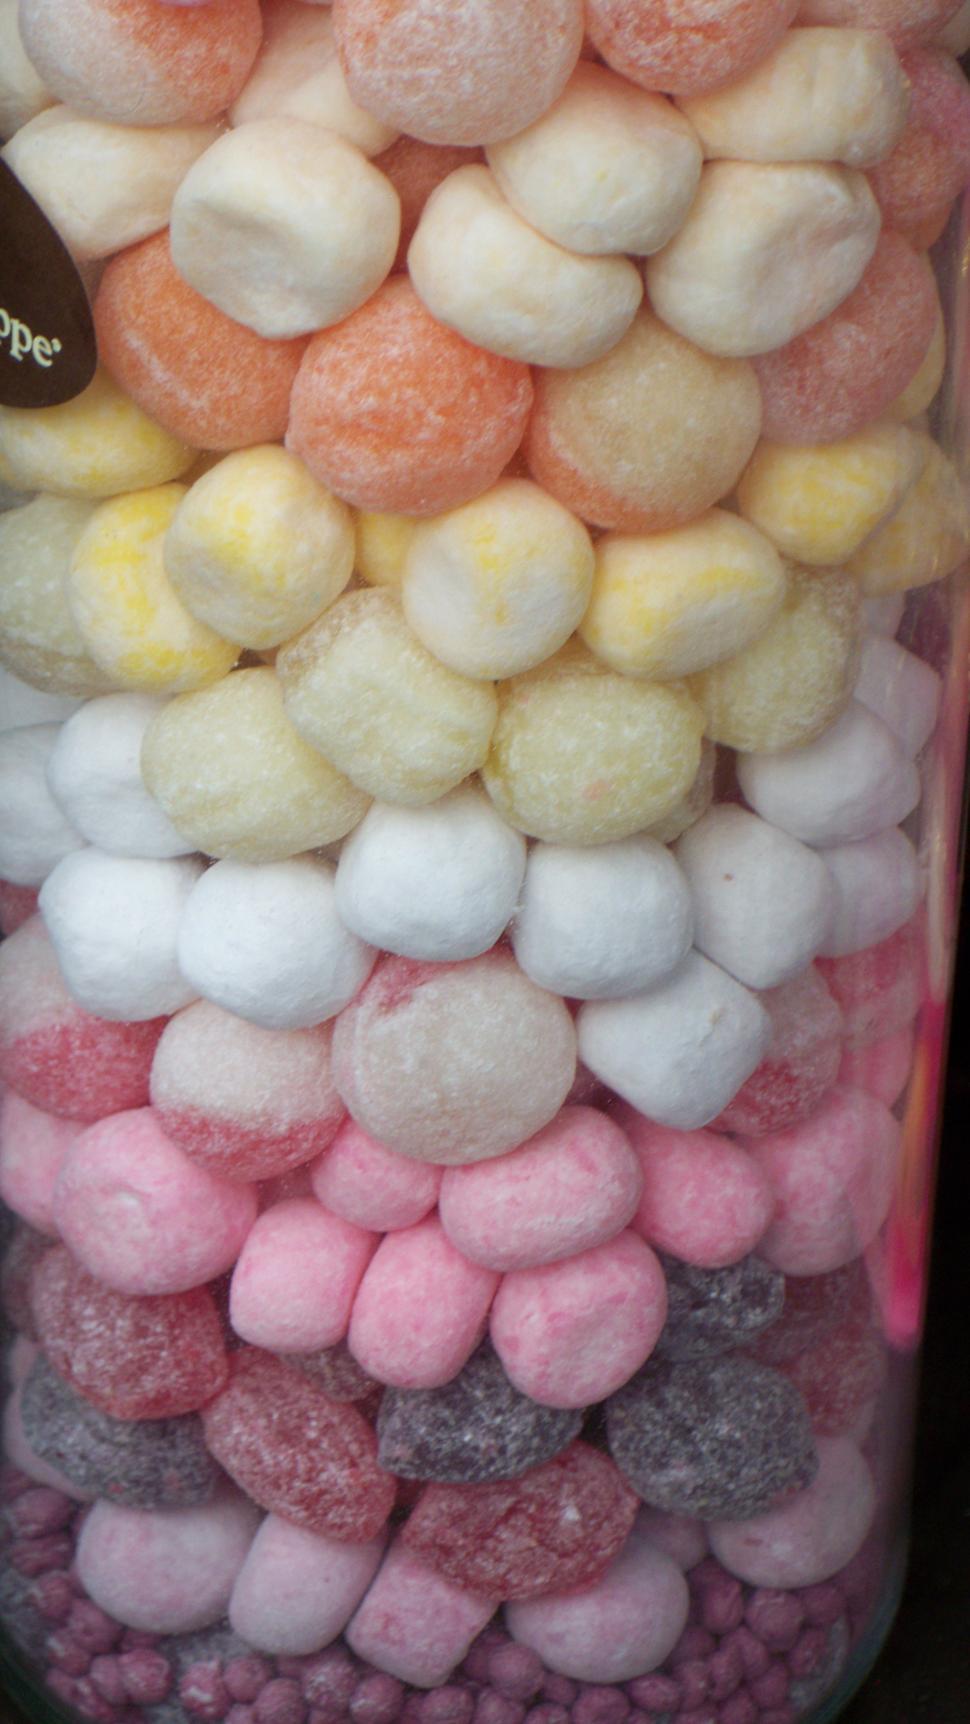 Free Image of Jar of Candy 